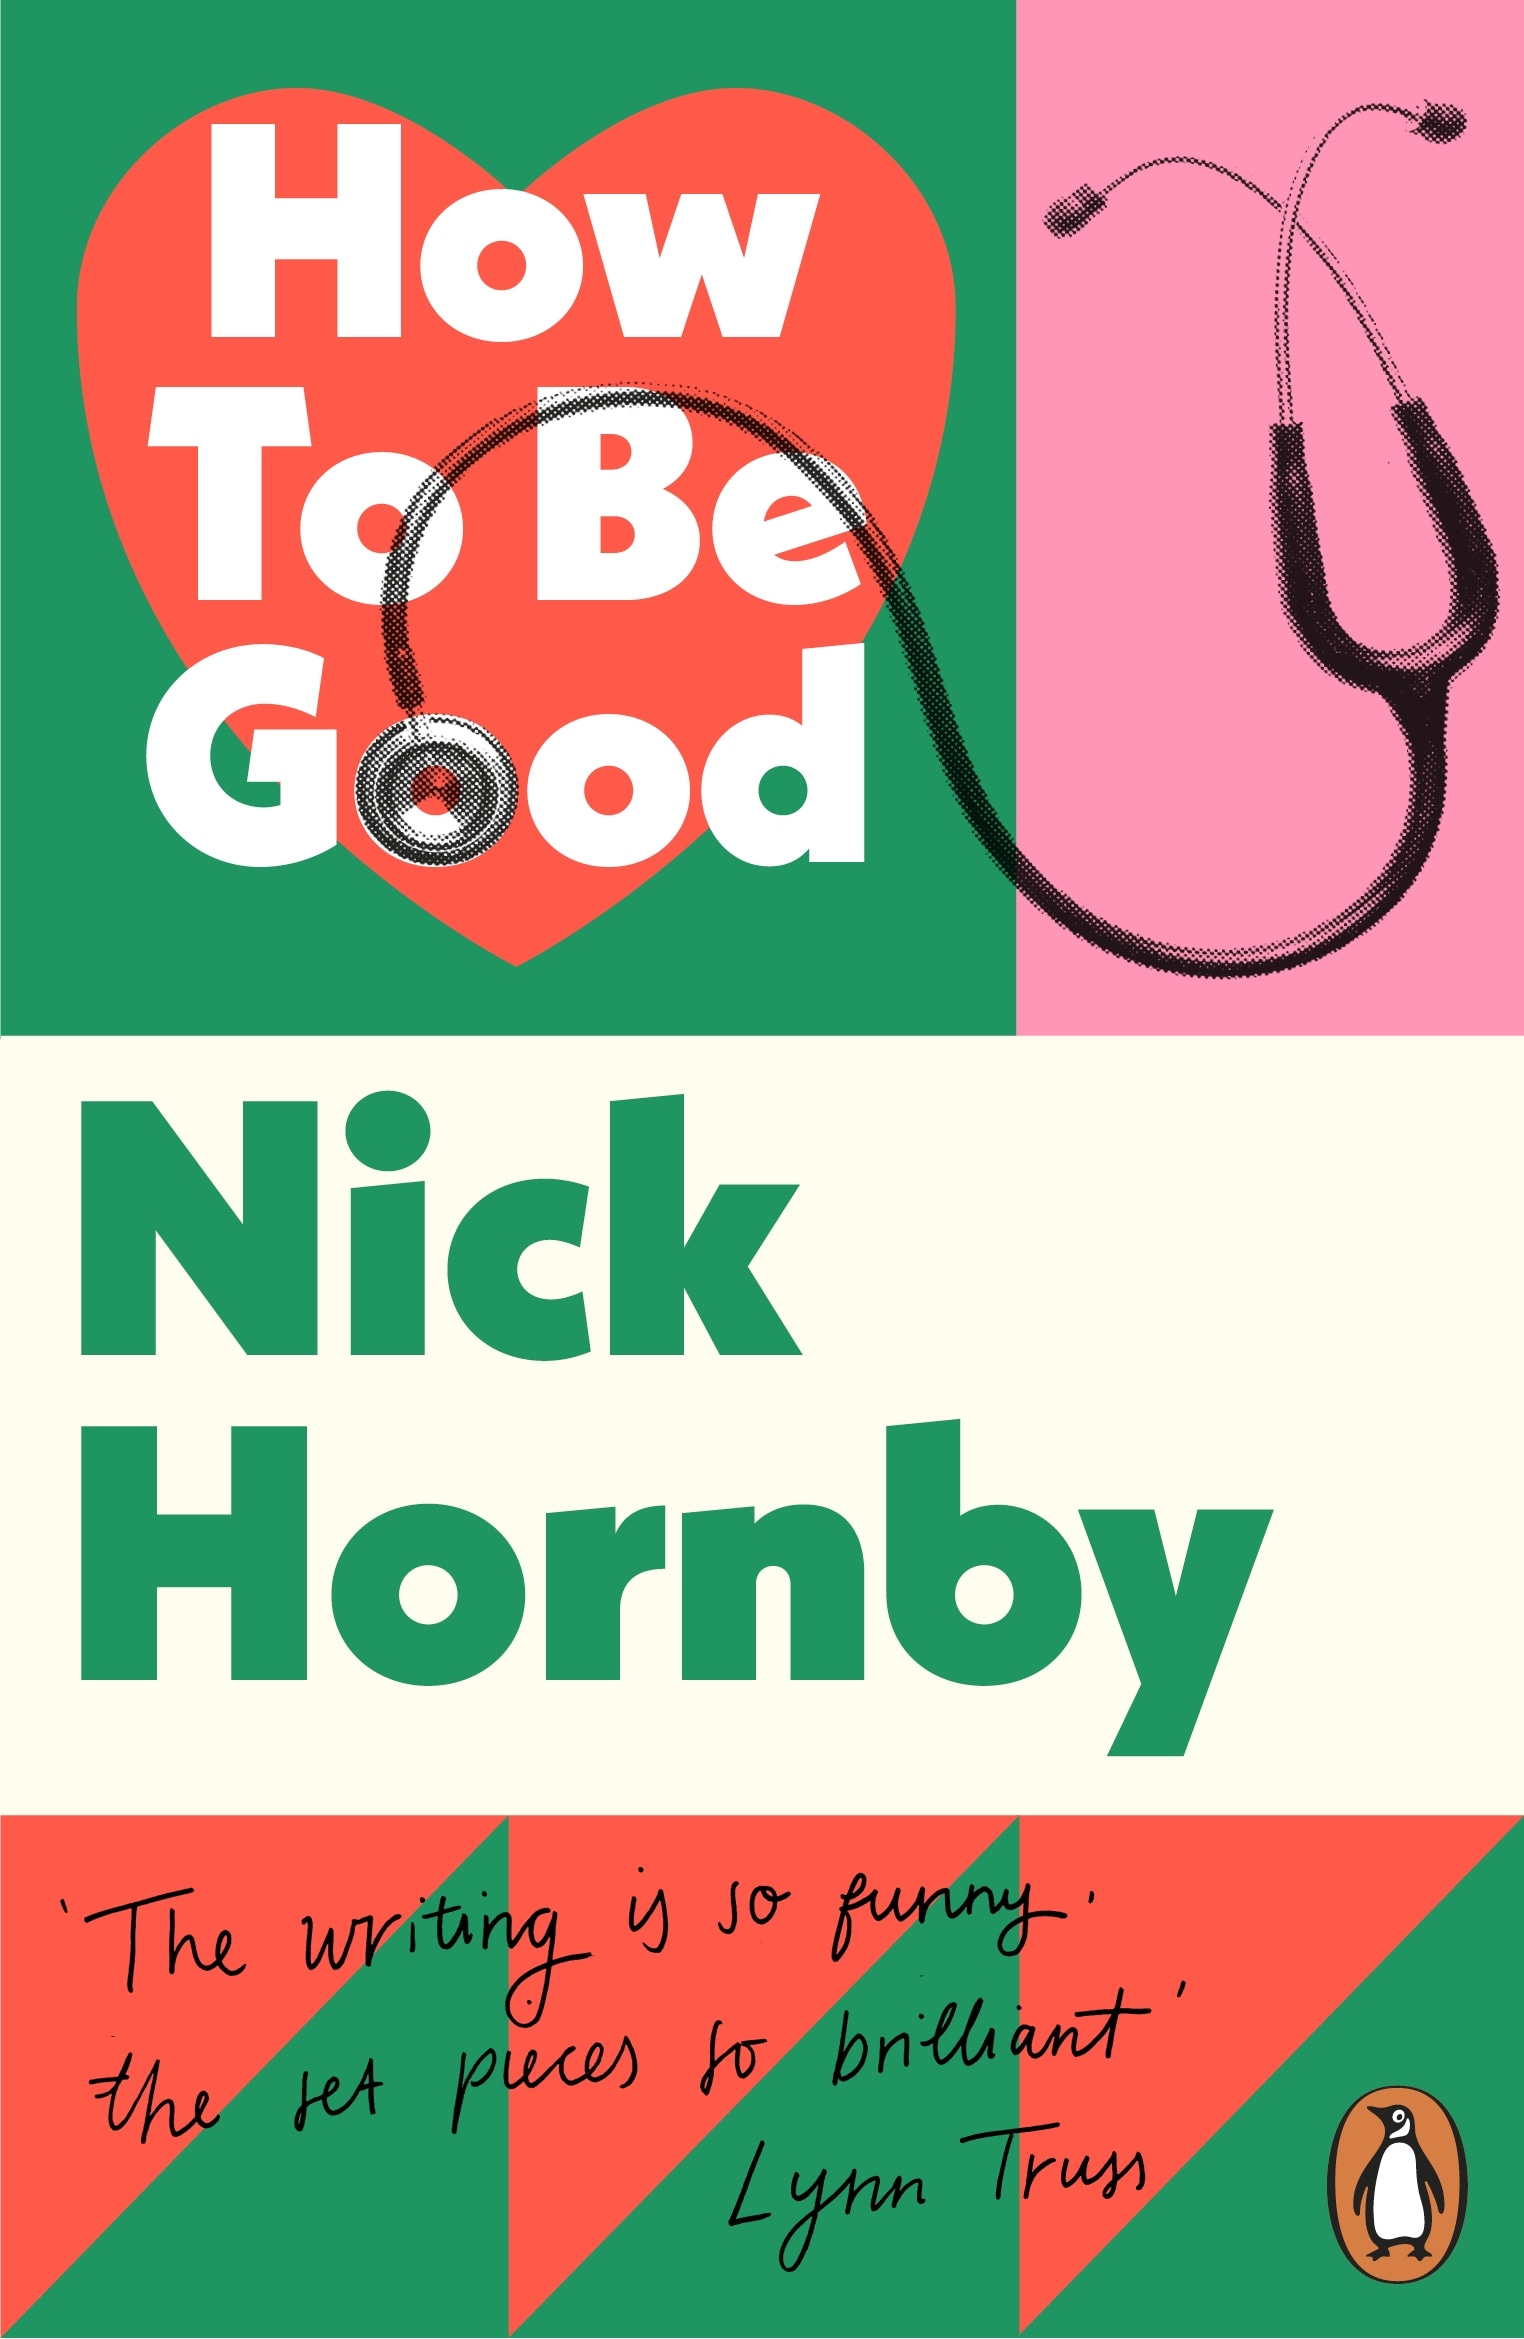 Book “How to be Good” by Nick Hornby — January 2, 2014